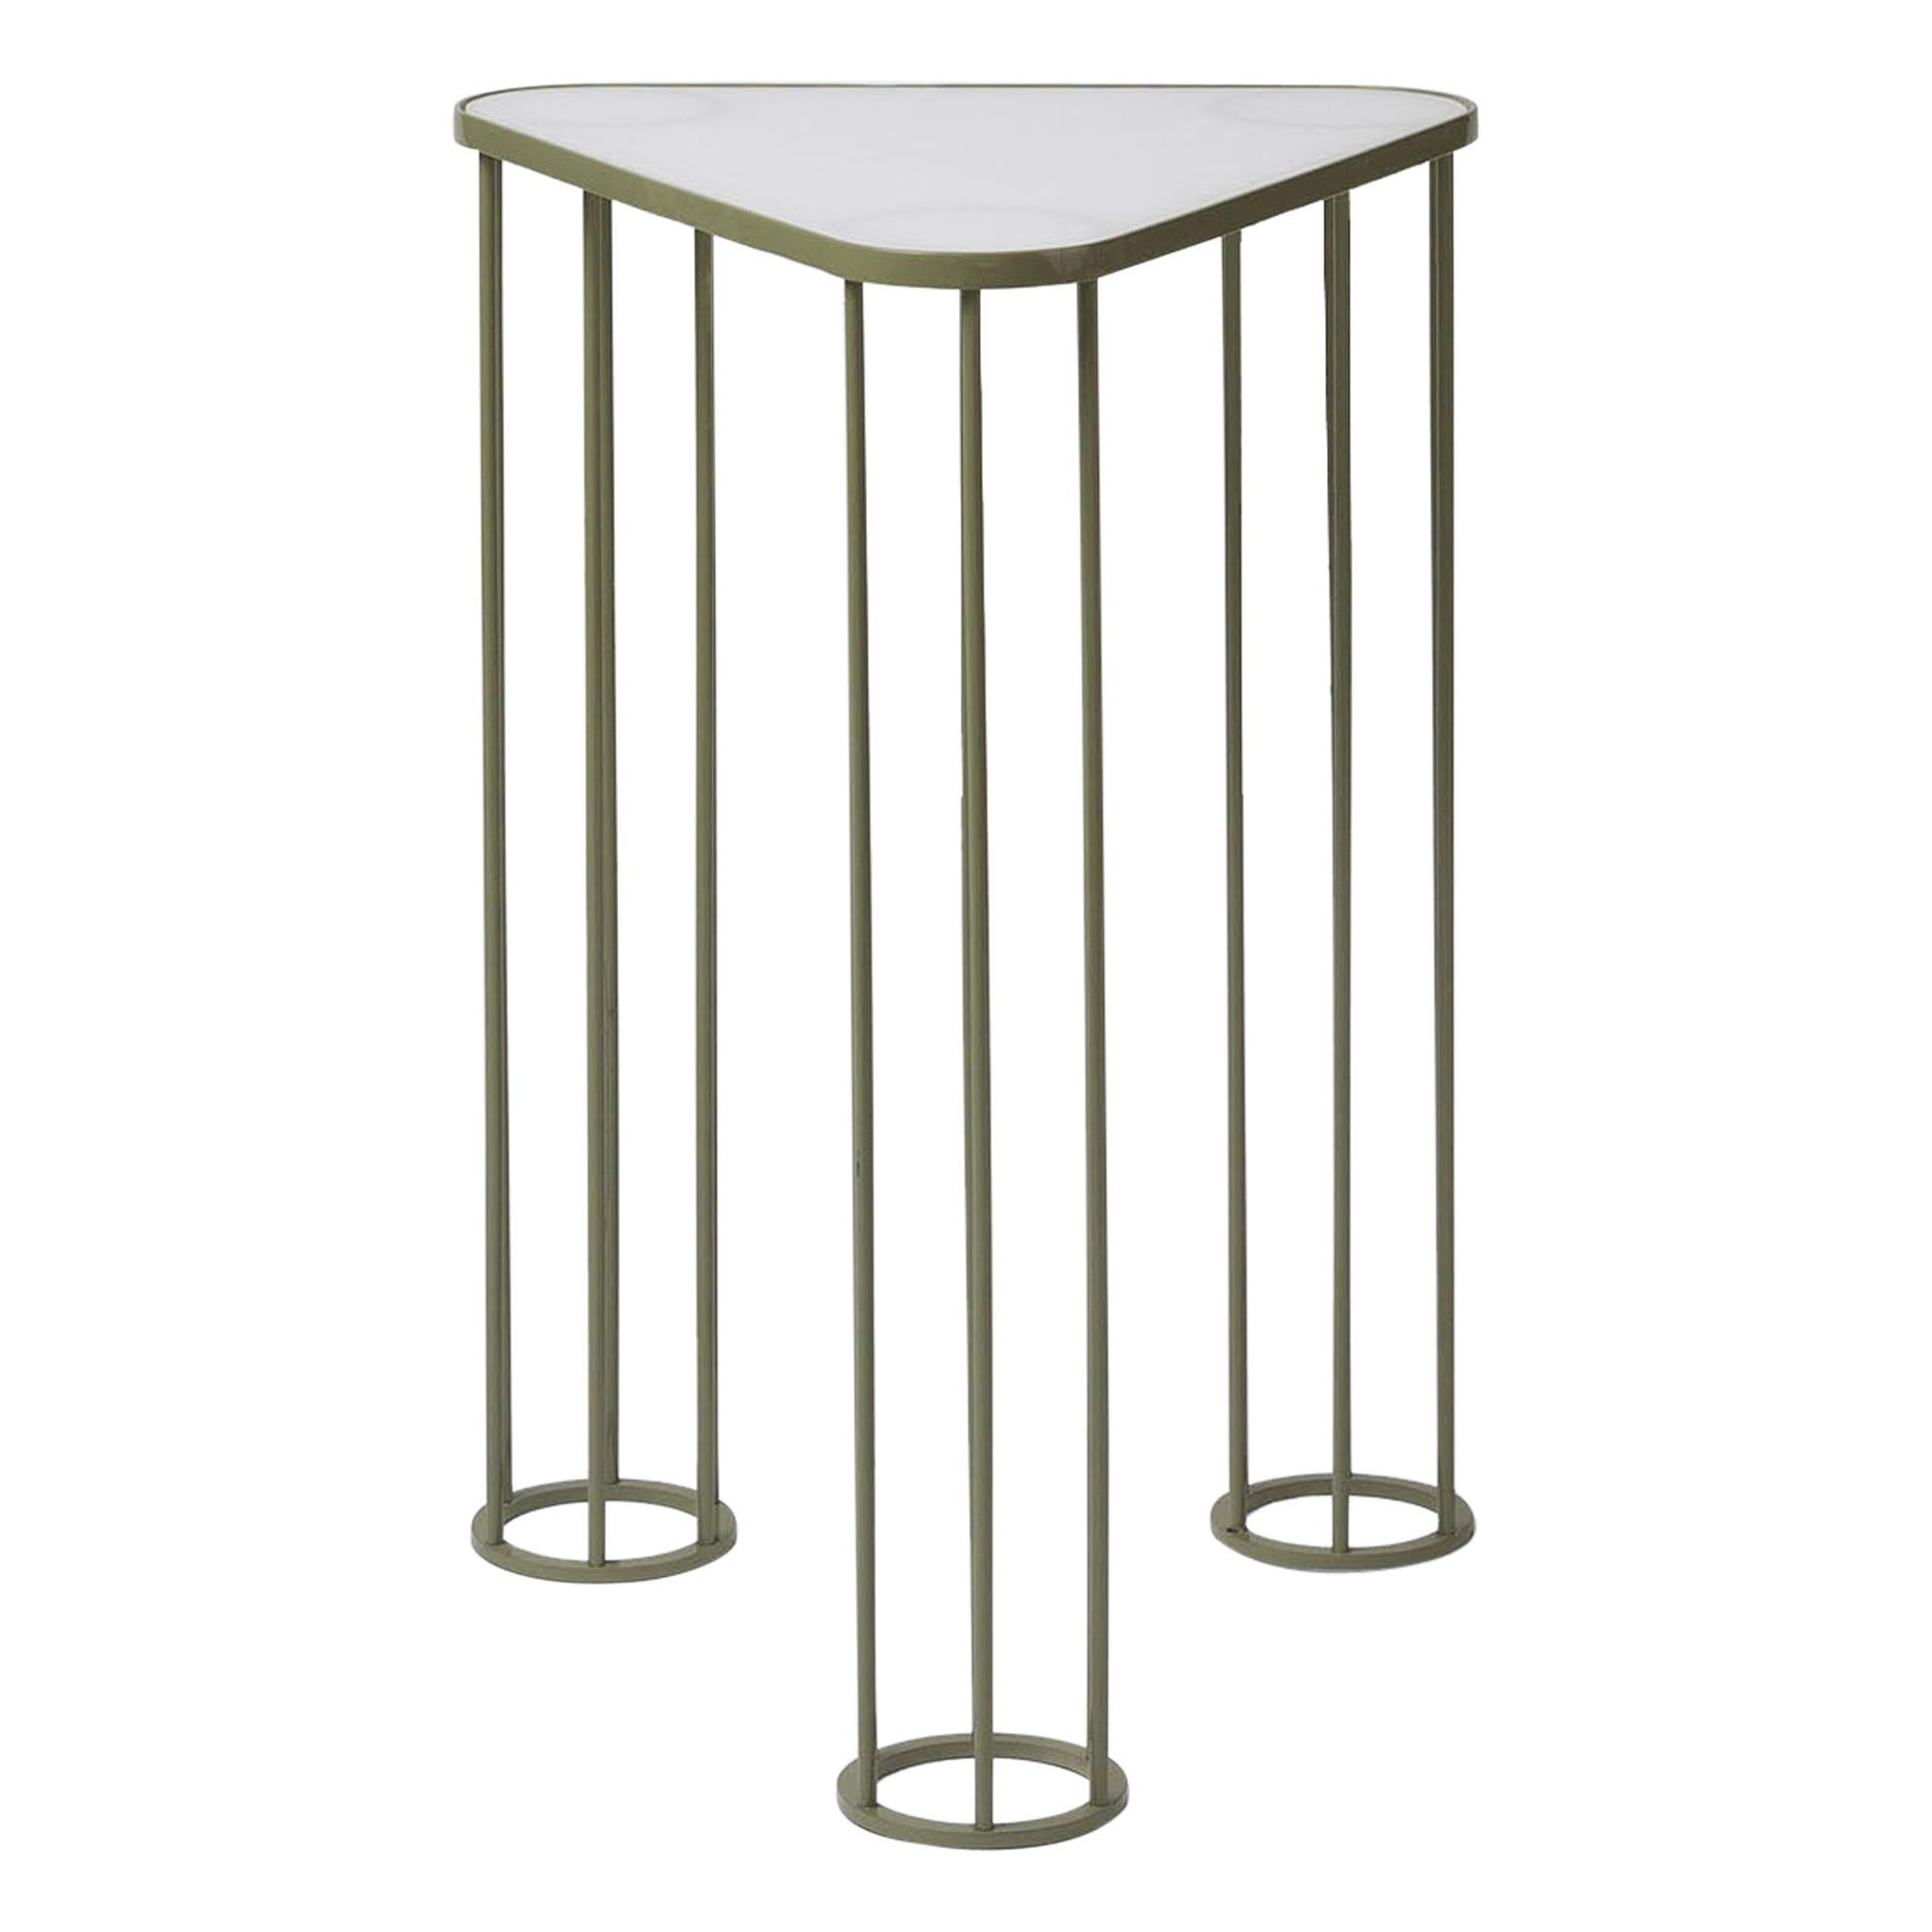 Muhly Outdoor Side Table in Sage Powdercoat with Cool White Glass